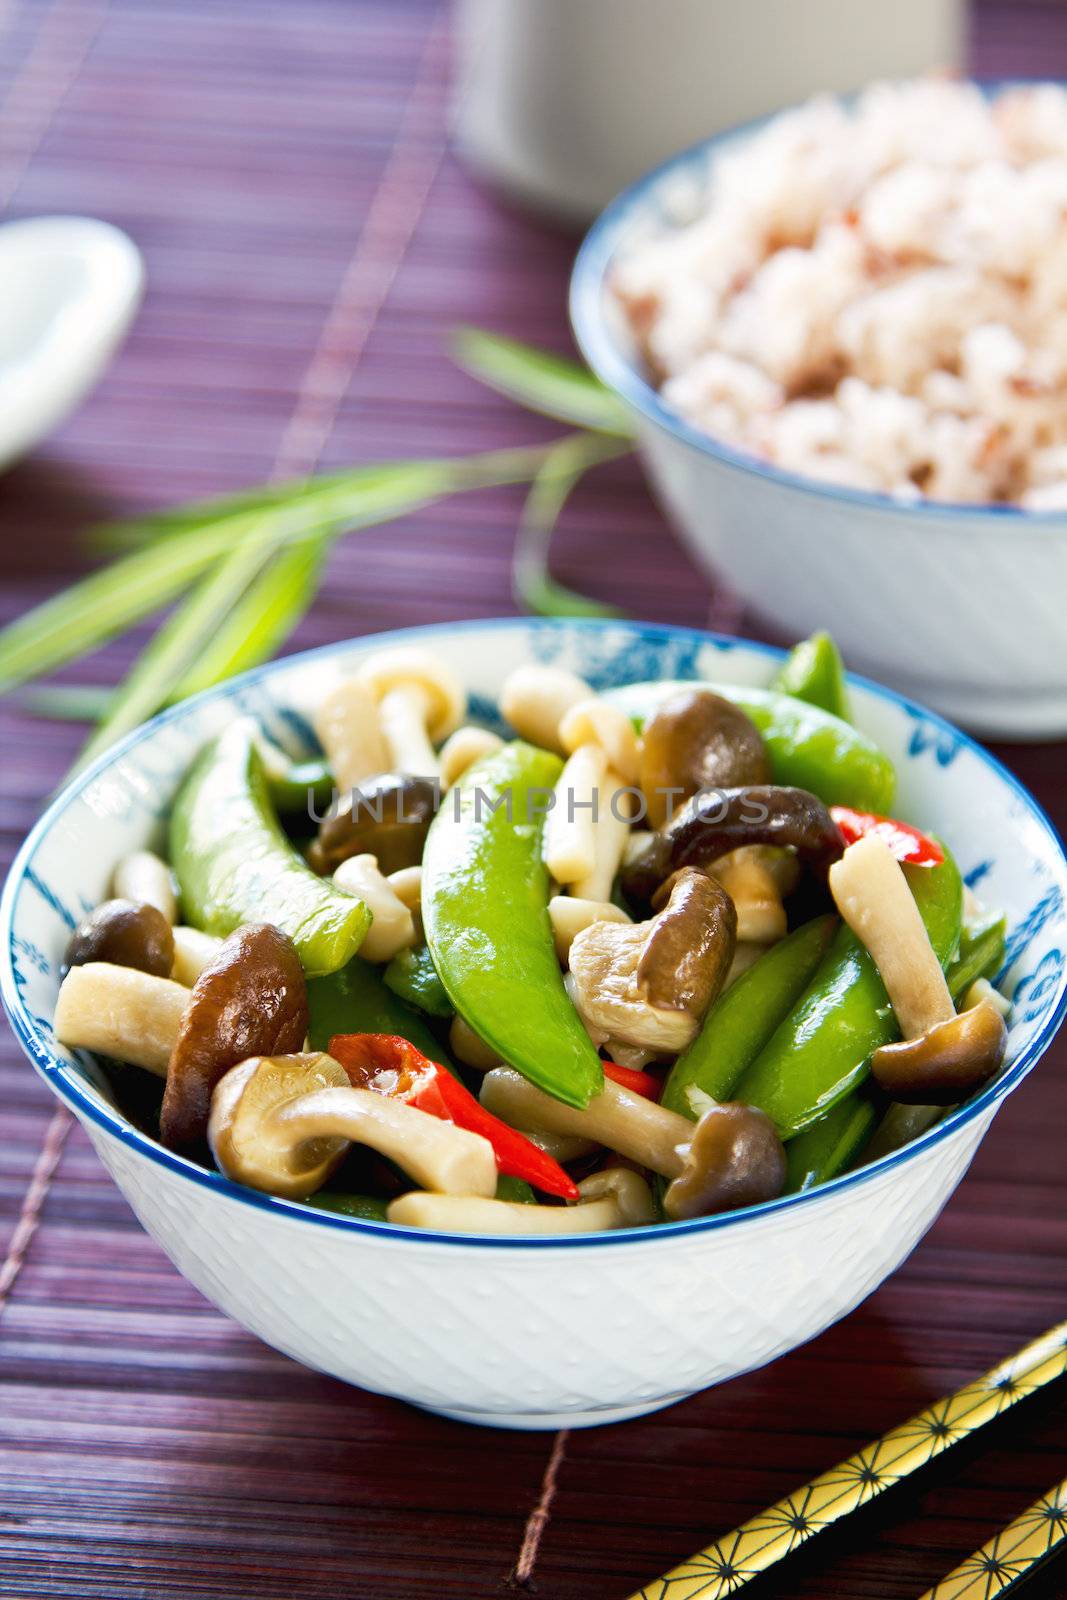 Stirred friedsnap  pea with mushroom in oyster sauce by brown rice